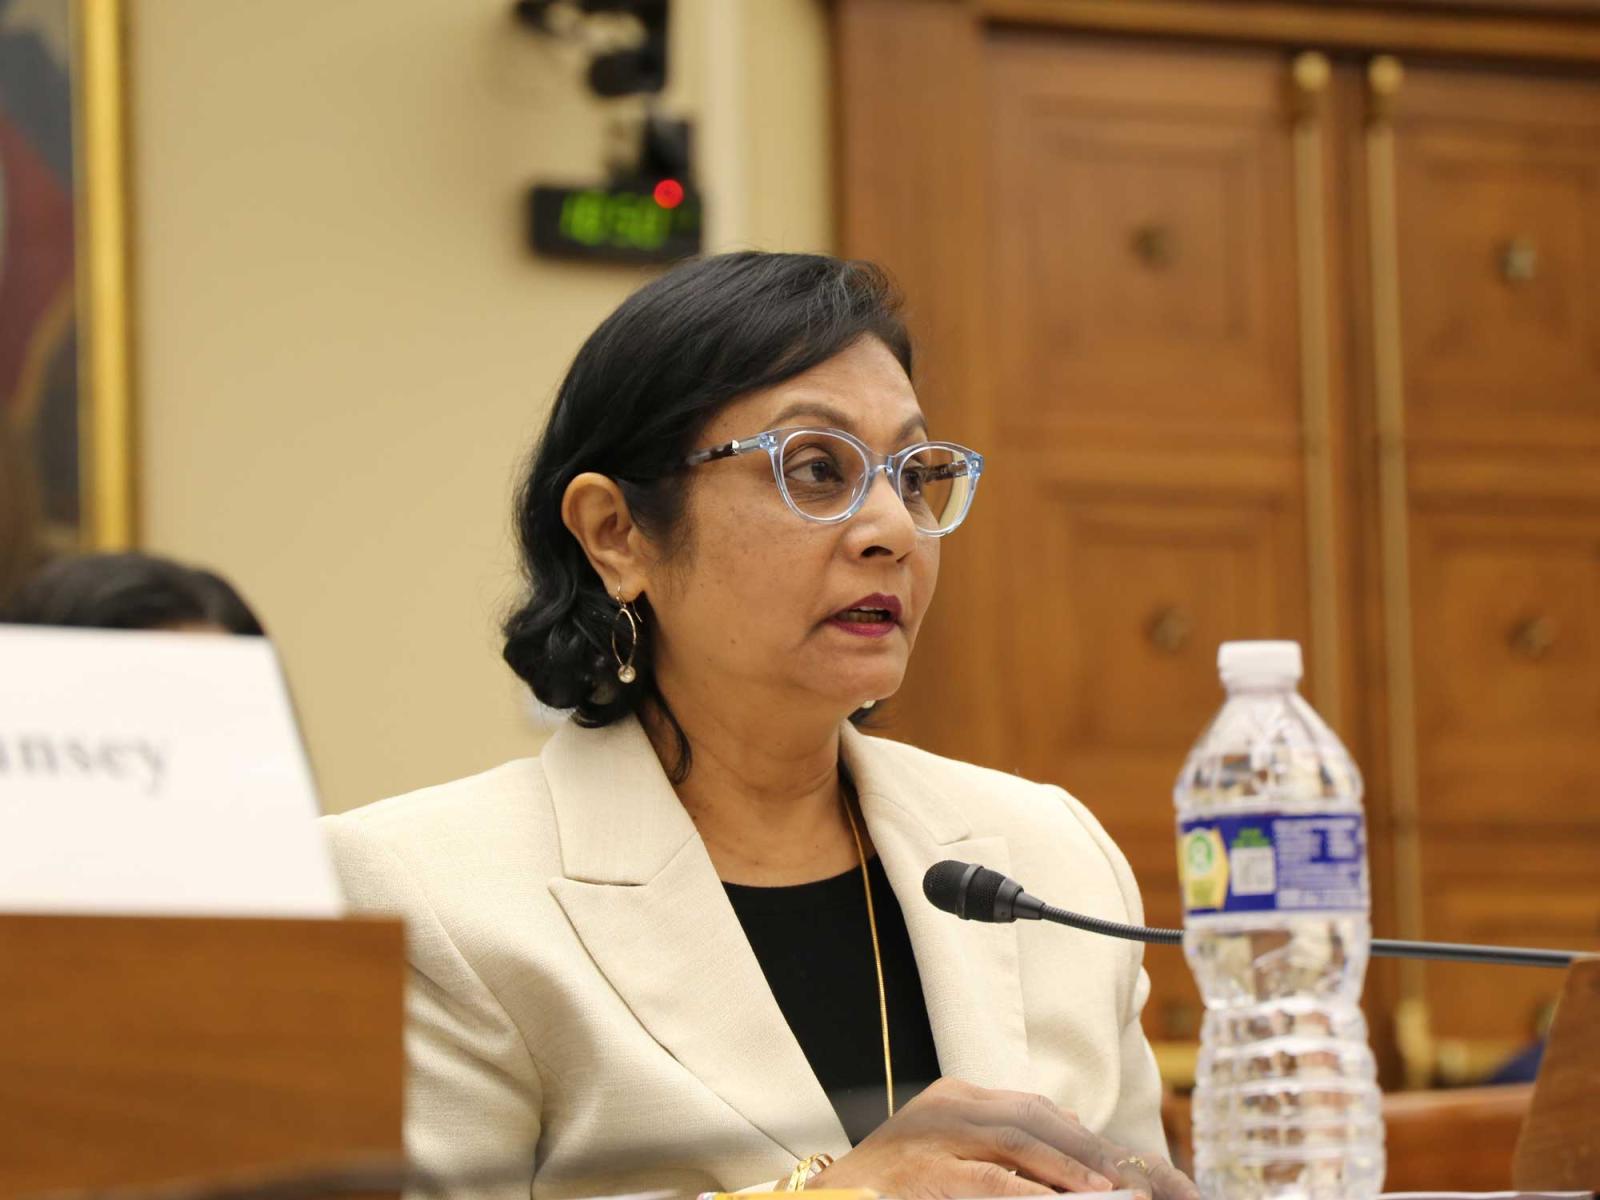 ESRI Executive Director Judy Jeevarajan discusses lithium-ion battery safety risks and recommends research into a battery design with an openable valve for fire suppression during a recent congressional hearing.